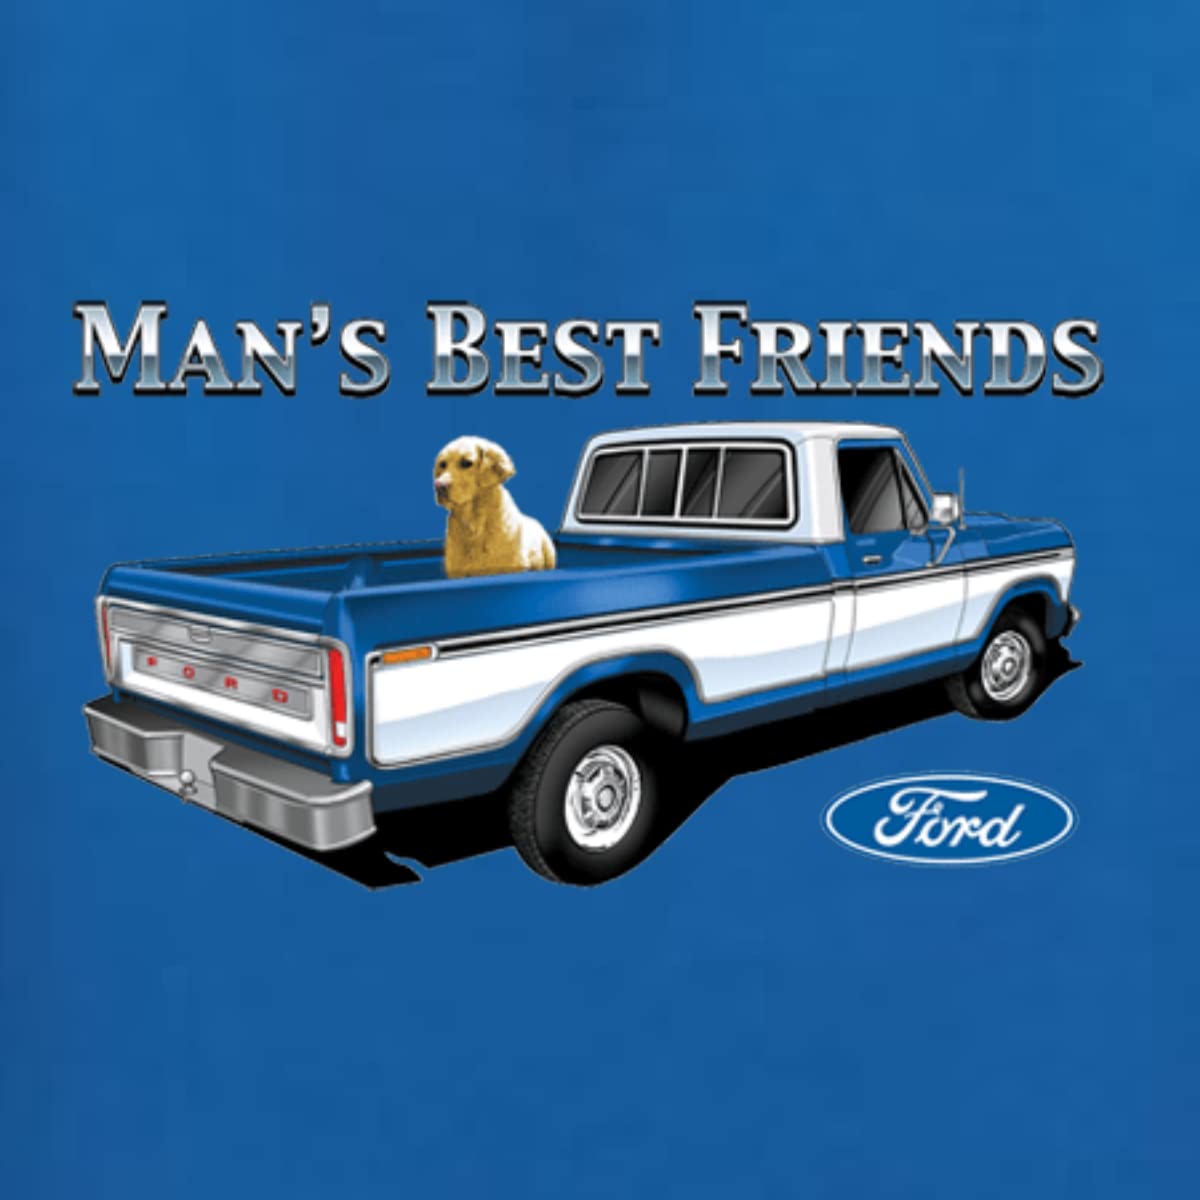 Ford Motors Funny Man's Best Friends Pickup Truck Dog Cars and Trucks Men's Graphic T-Shirt, Royal, Large